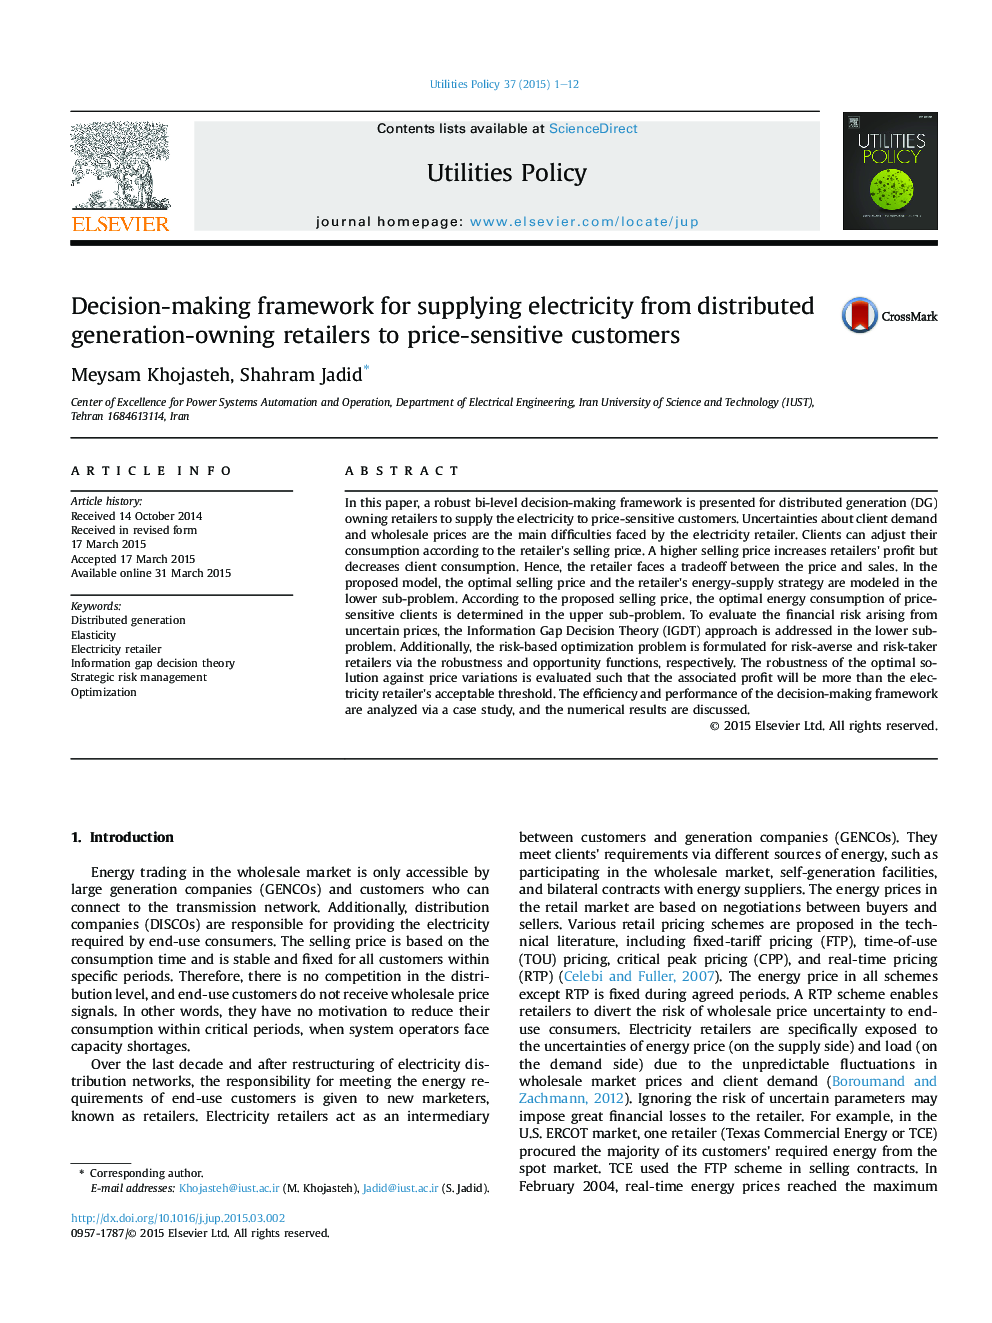 Decision-making framework for supplying electricity from distributed generation-owning retailers to price-sensitive customers